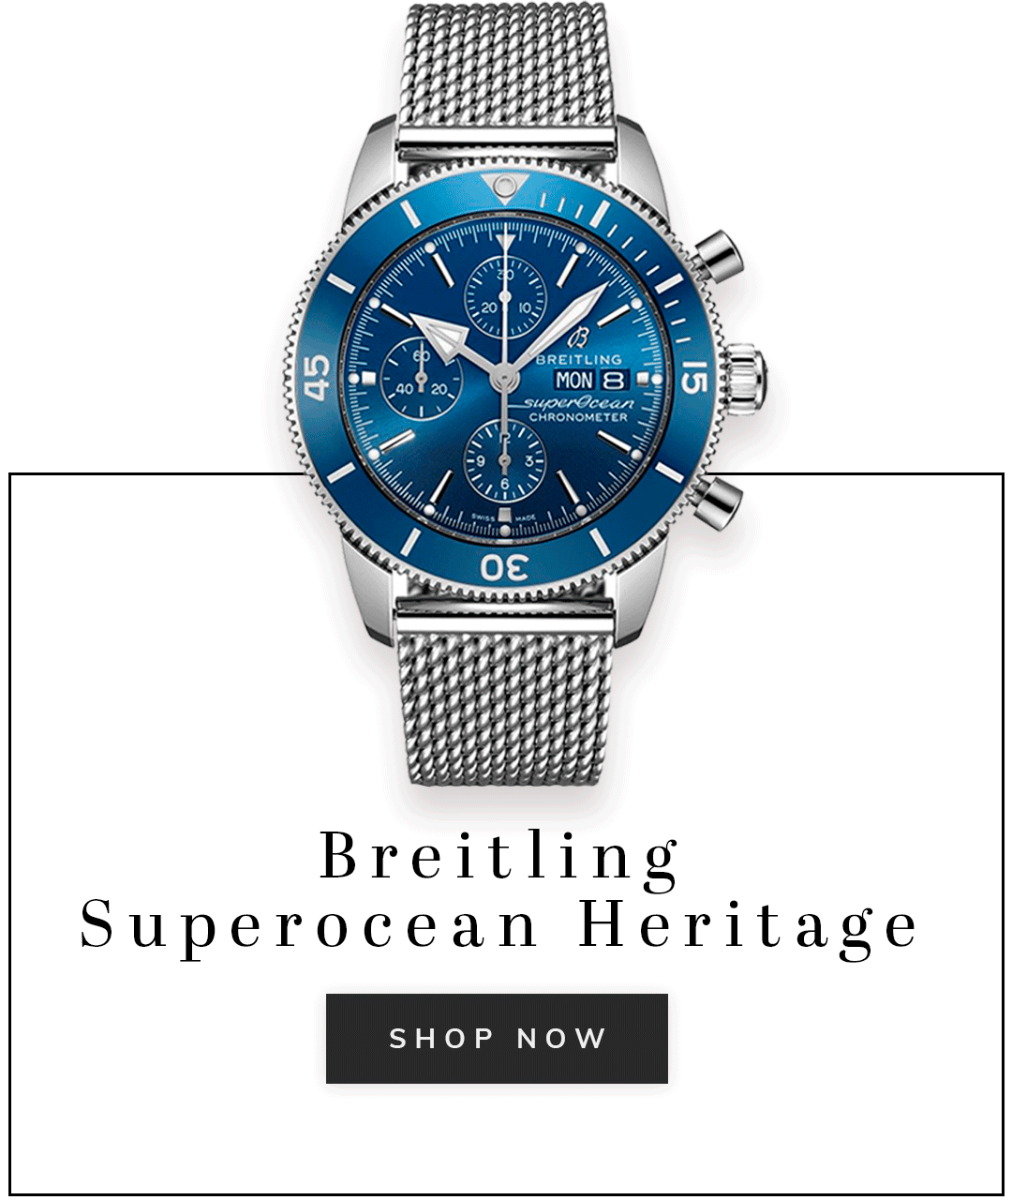 A Breitling Superocean Heritage watch with text shop now